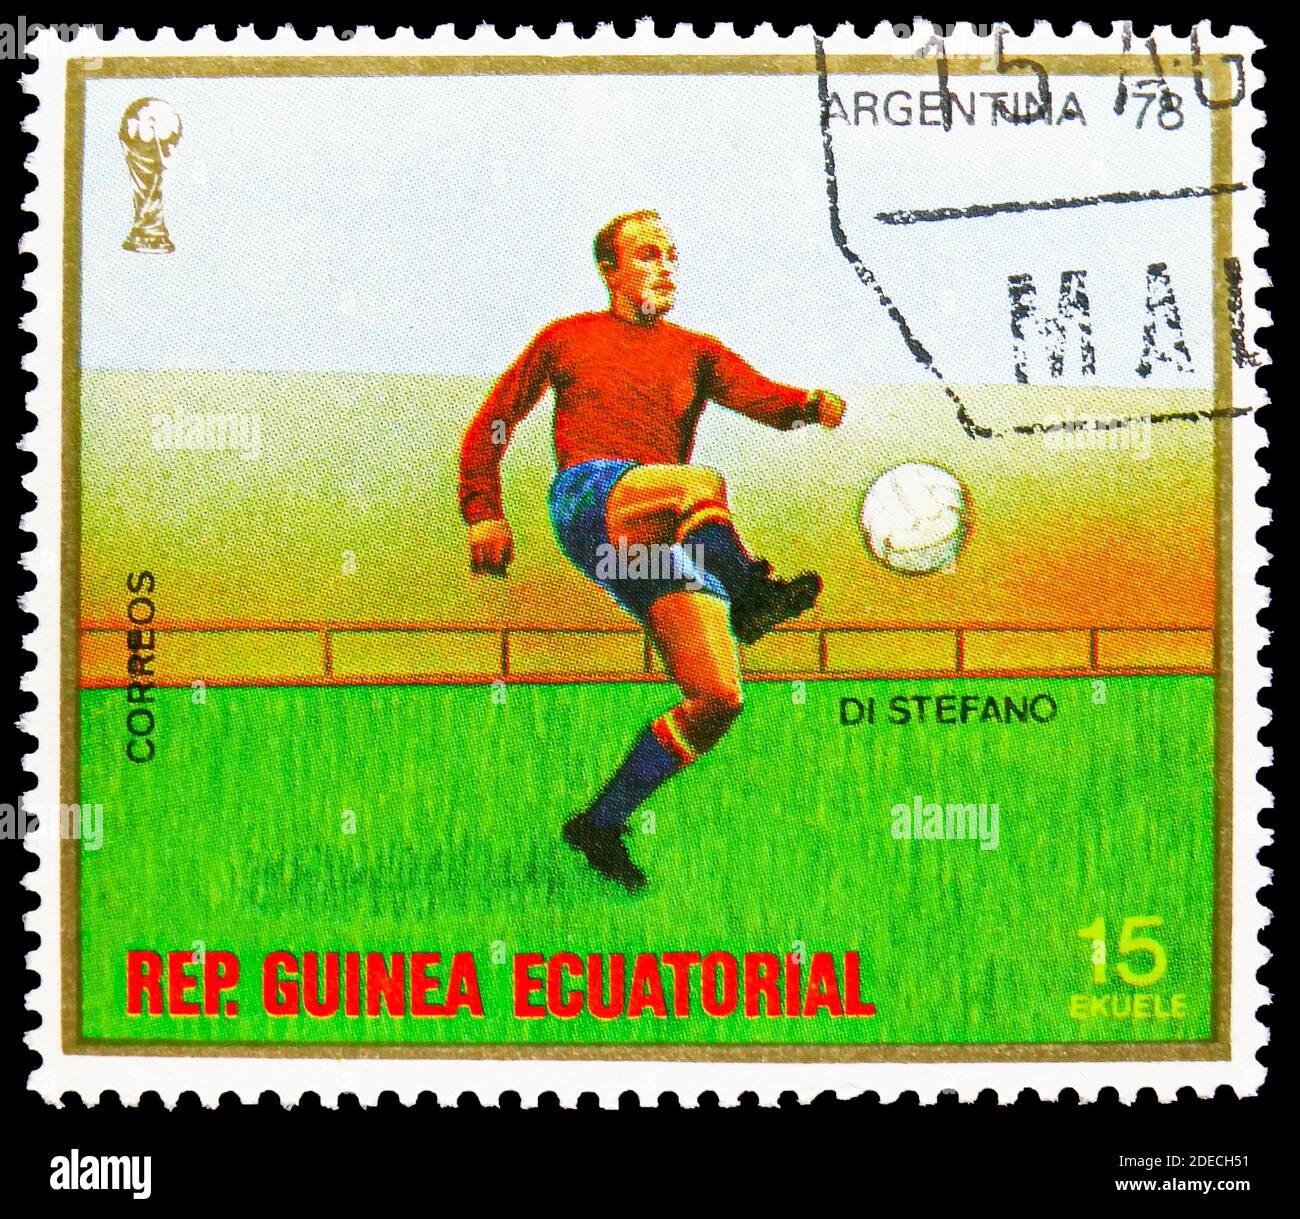 MOSCOW, RUSSIA - OCTOBER 17, 2020: Postage stamp printed in Equatorial Guinea shows Di Stefano, Football World Cup 1978, Argentina serie, circa 1978 Stock Photo